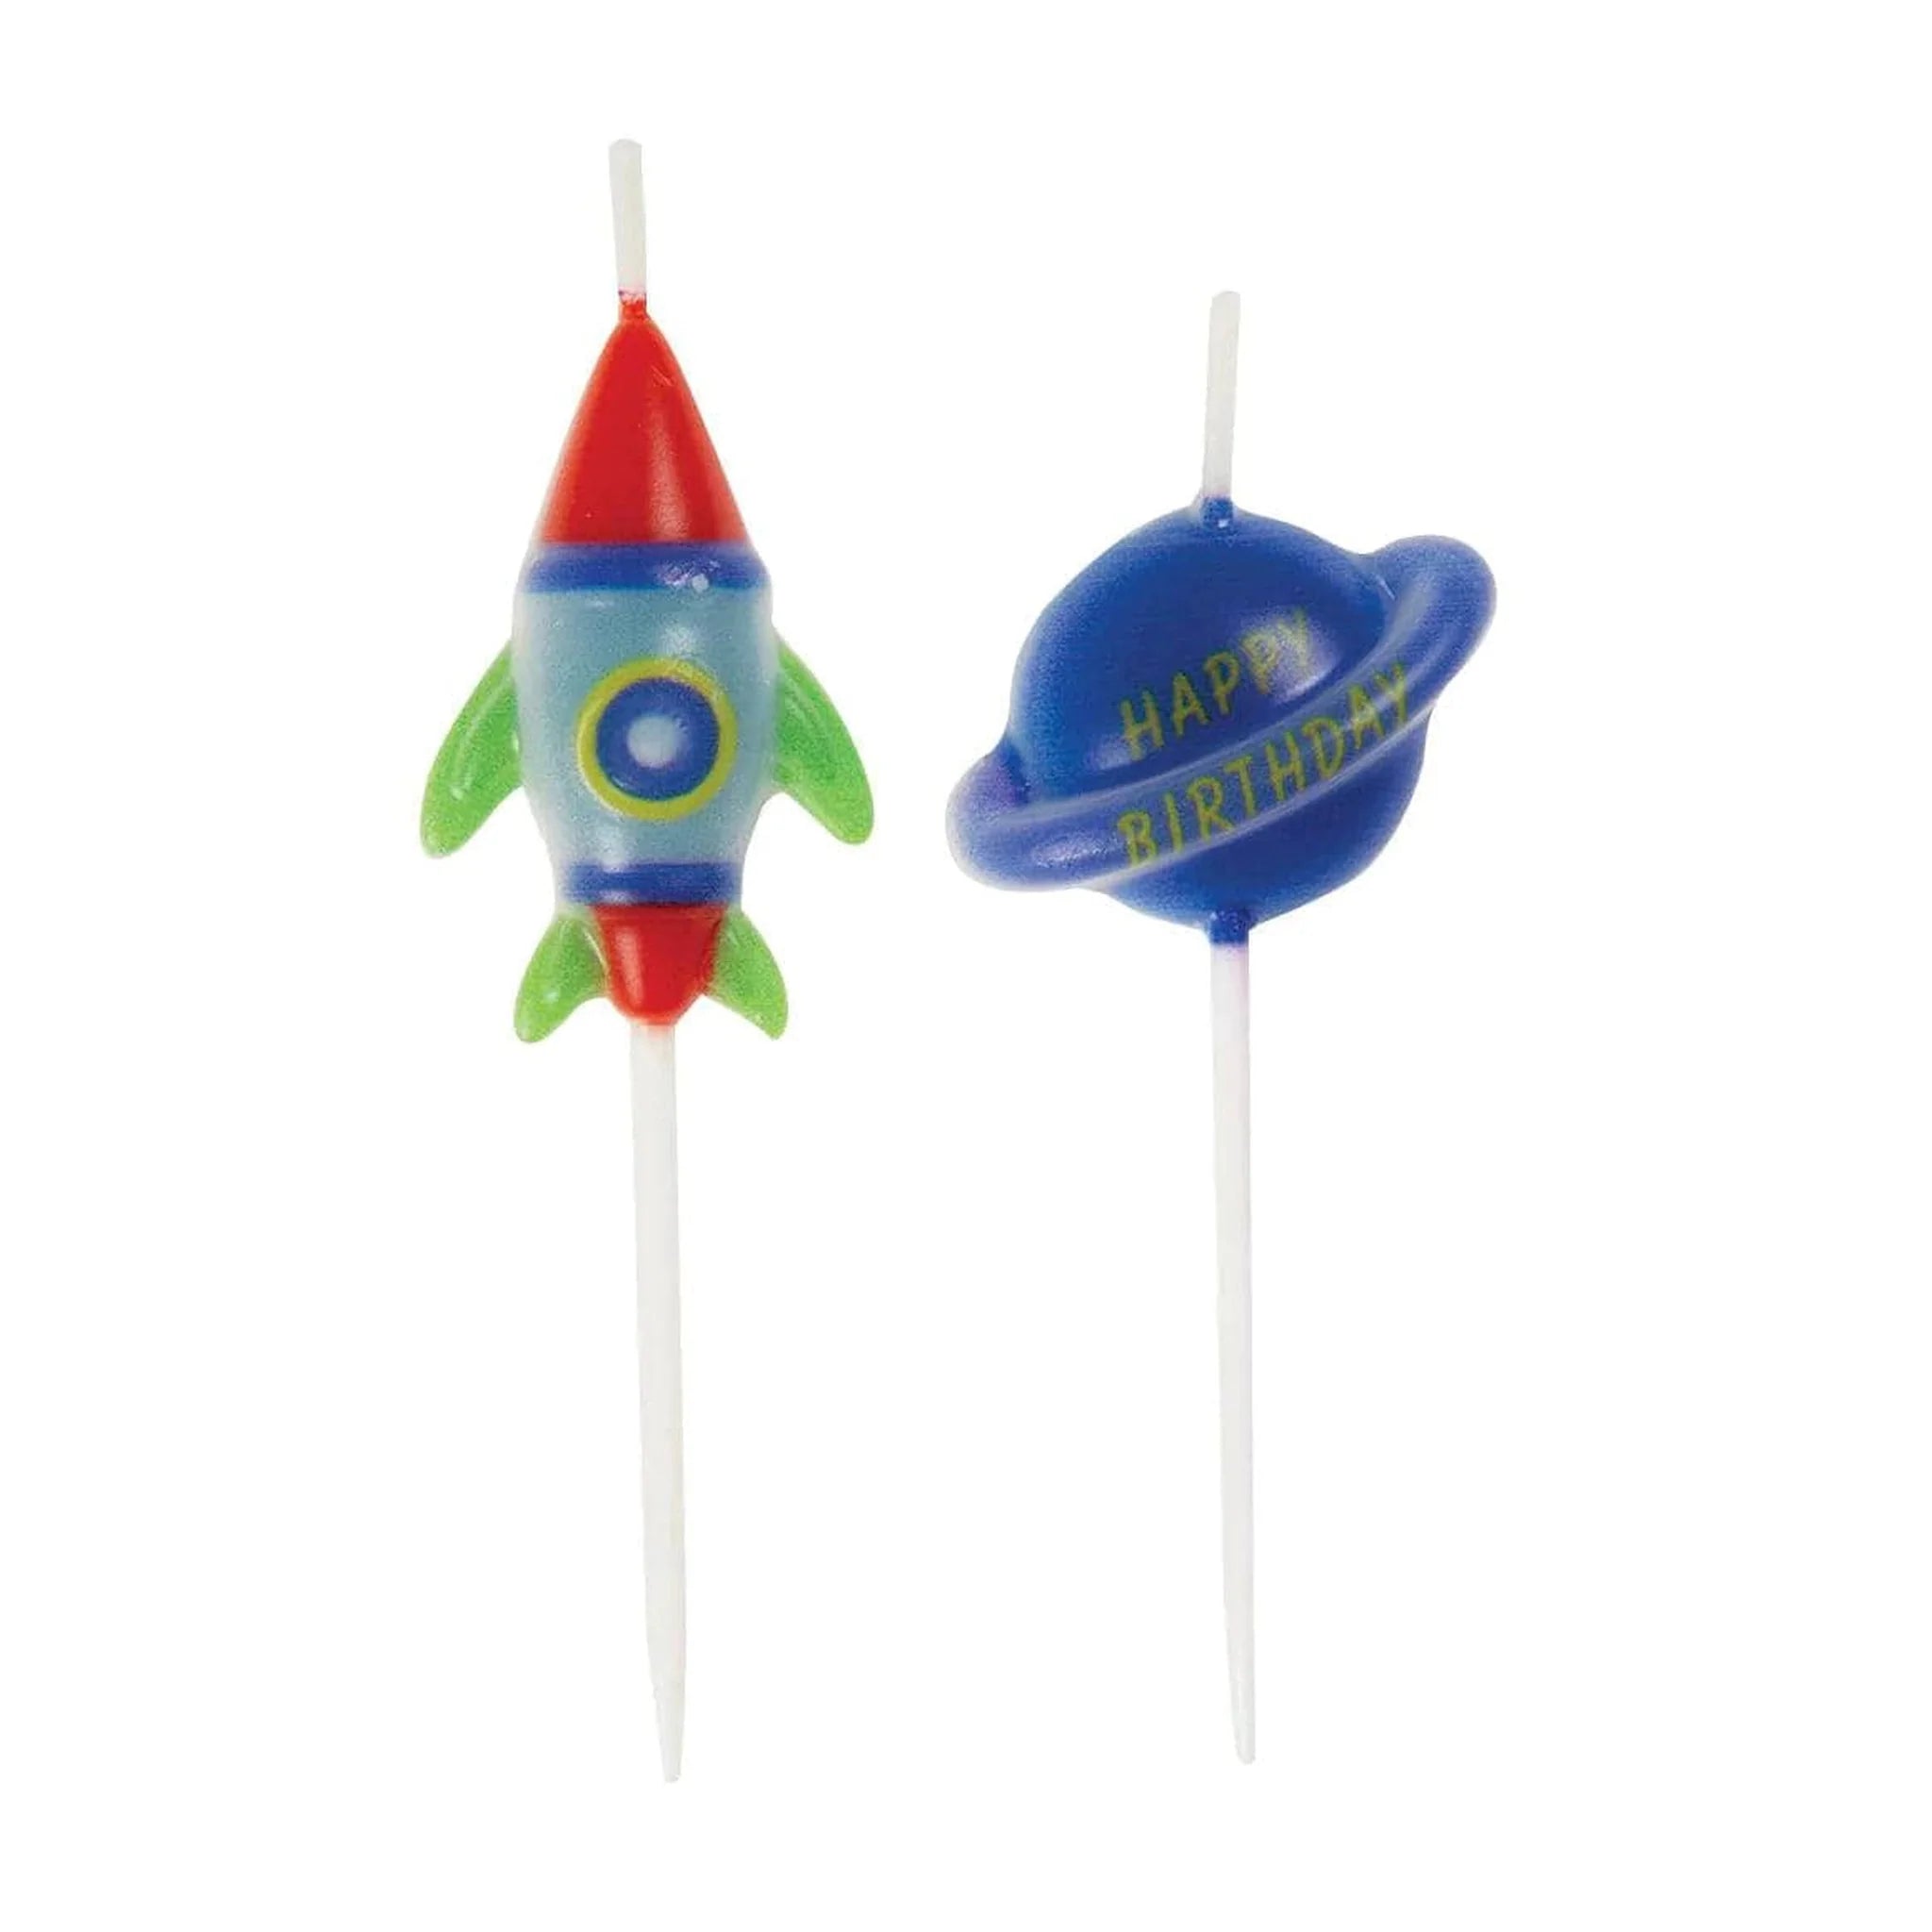 Space Birthday Candles 6pk - Kids Party Craft